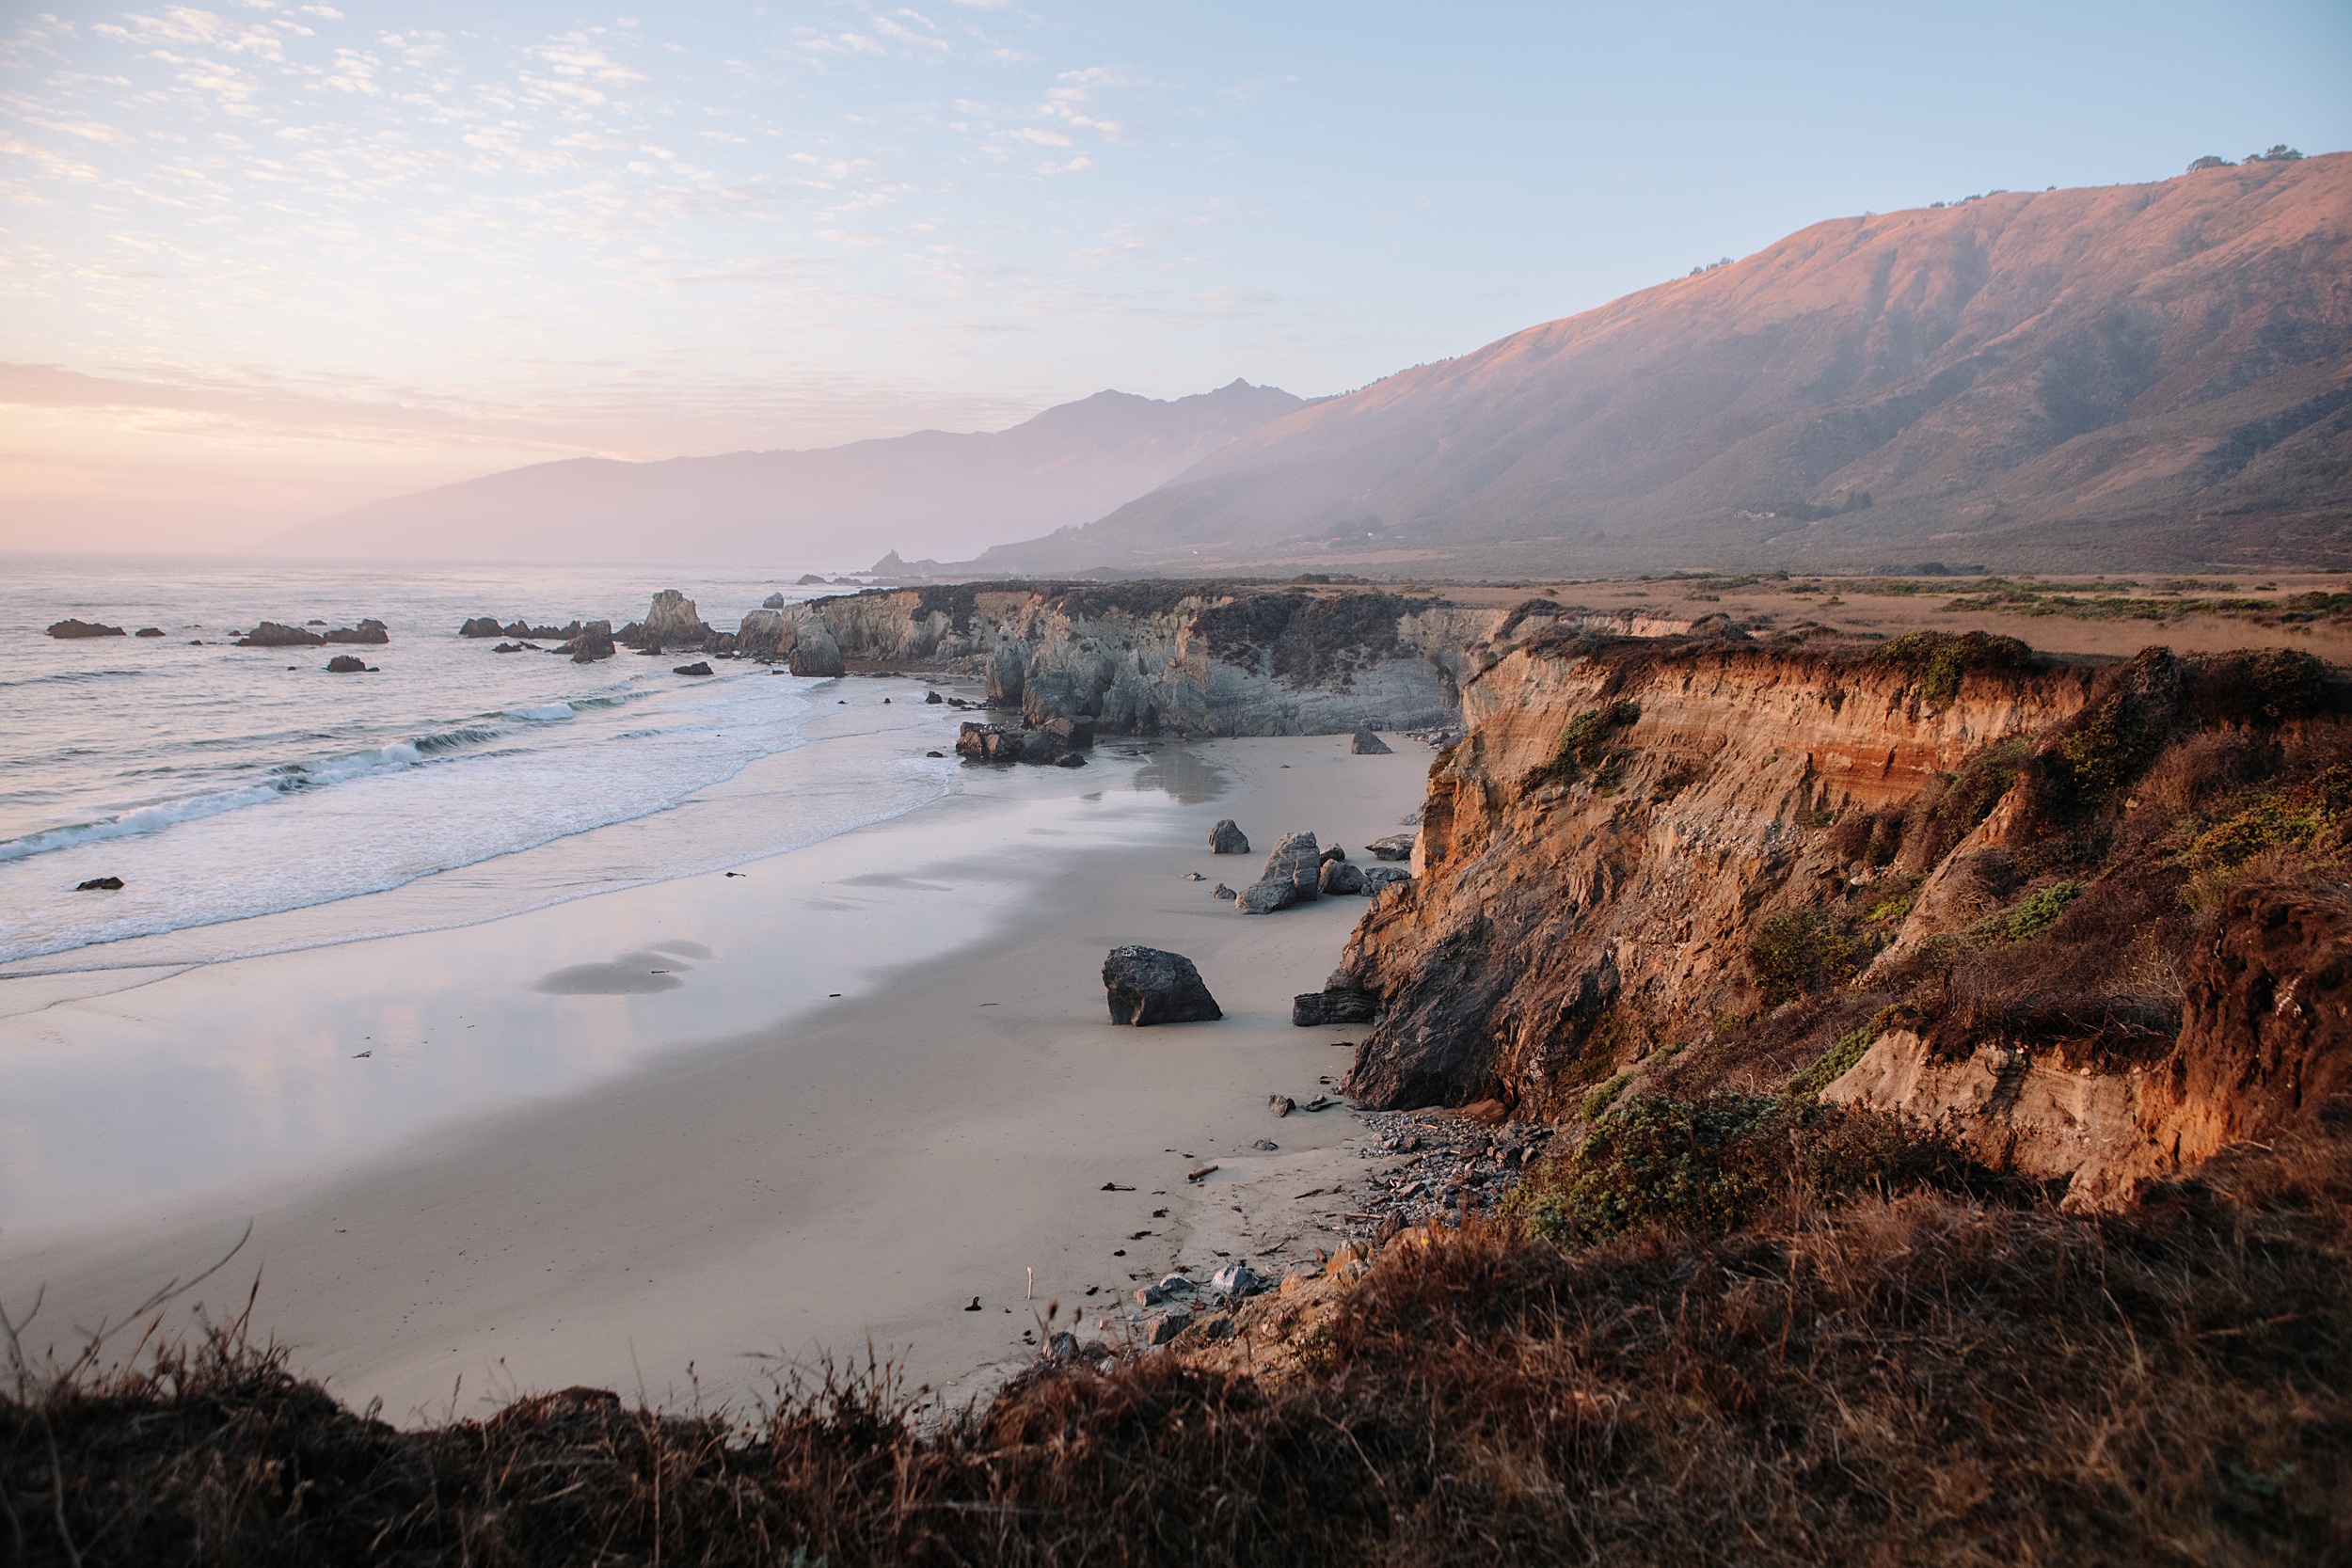 10-Best-Places-to-Elope-In-California_0003 Northern California Elopement Guide: Best Places to Elope